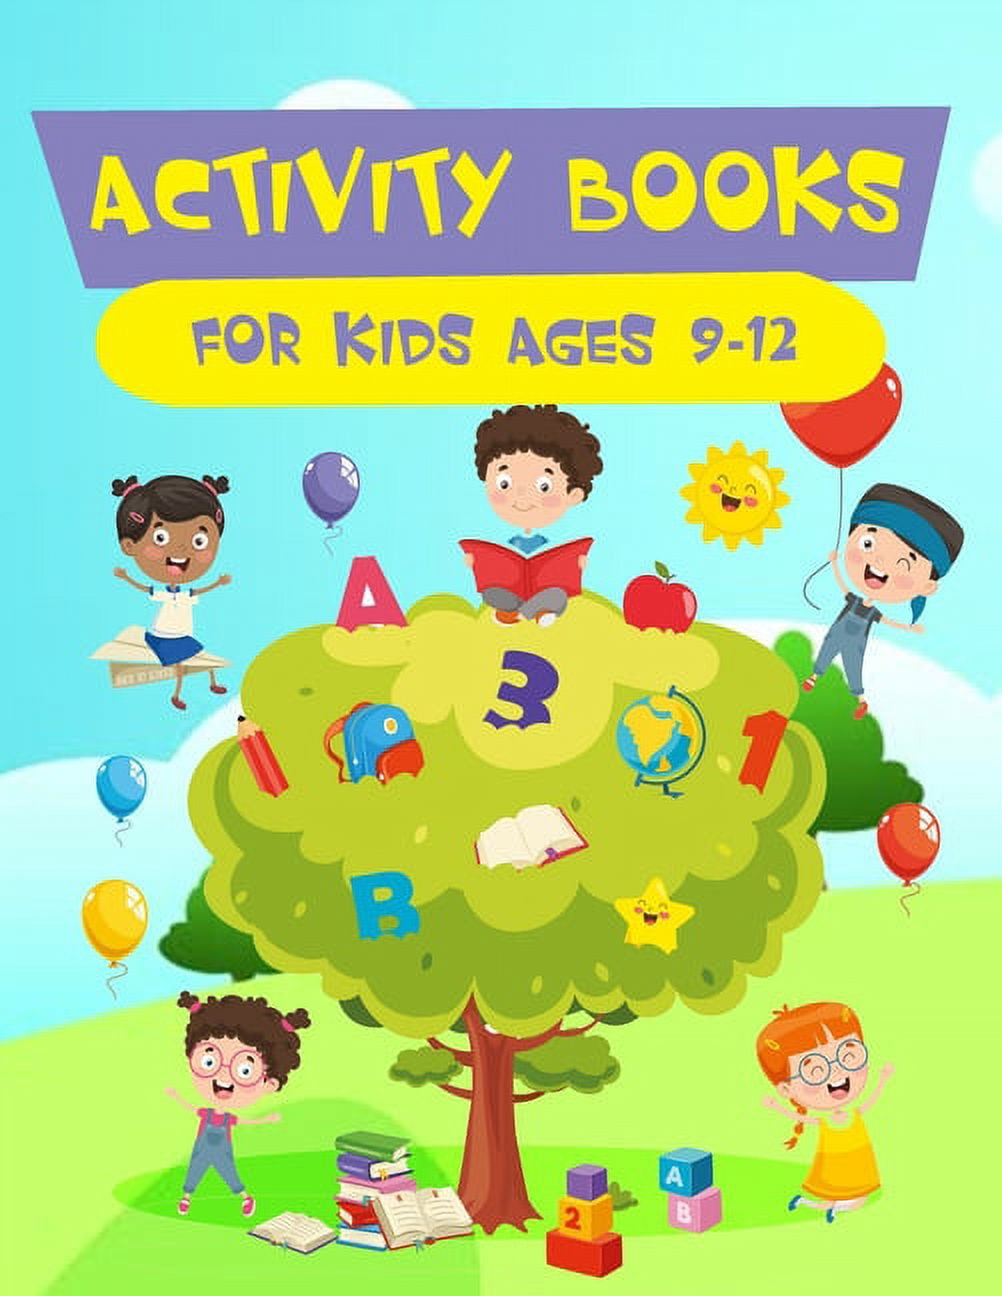 Top Activity Books for Kids Ages 9 to 12 - Imagination Soup